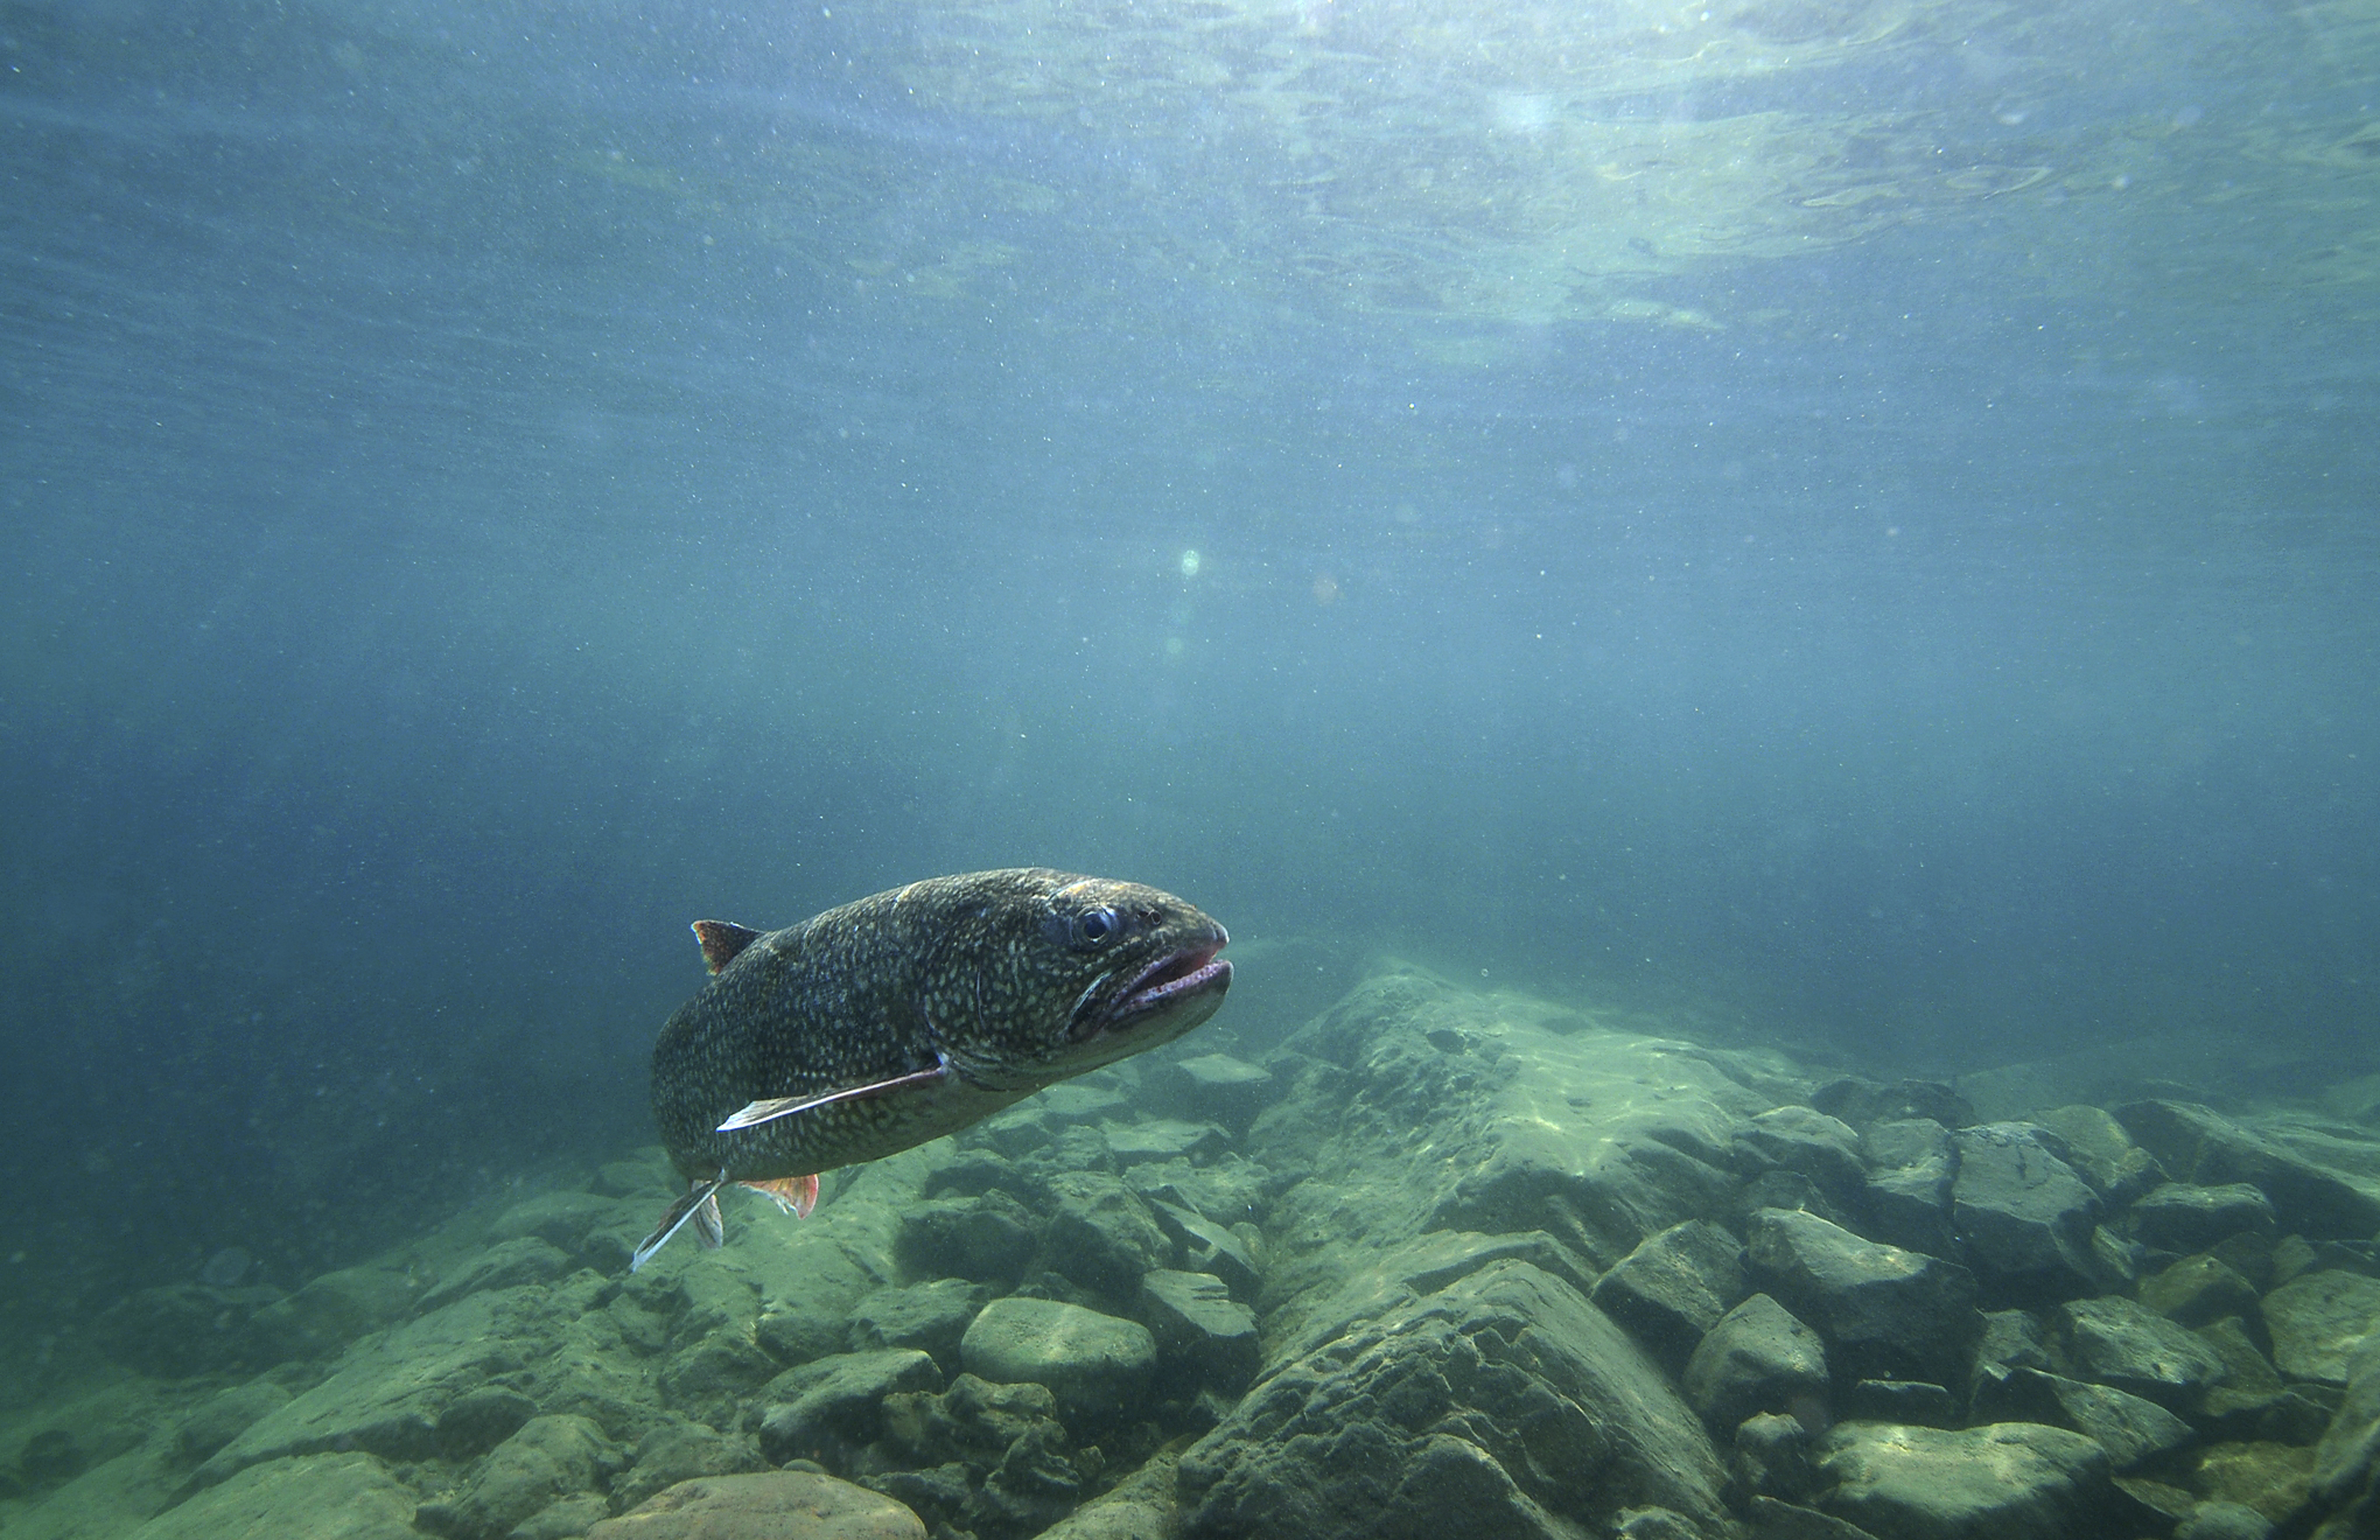 Why fish consumption advisories in Great Lakes states carry their own risks